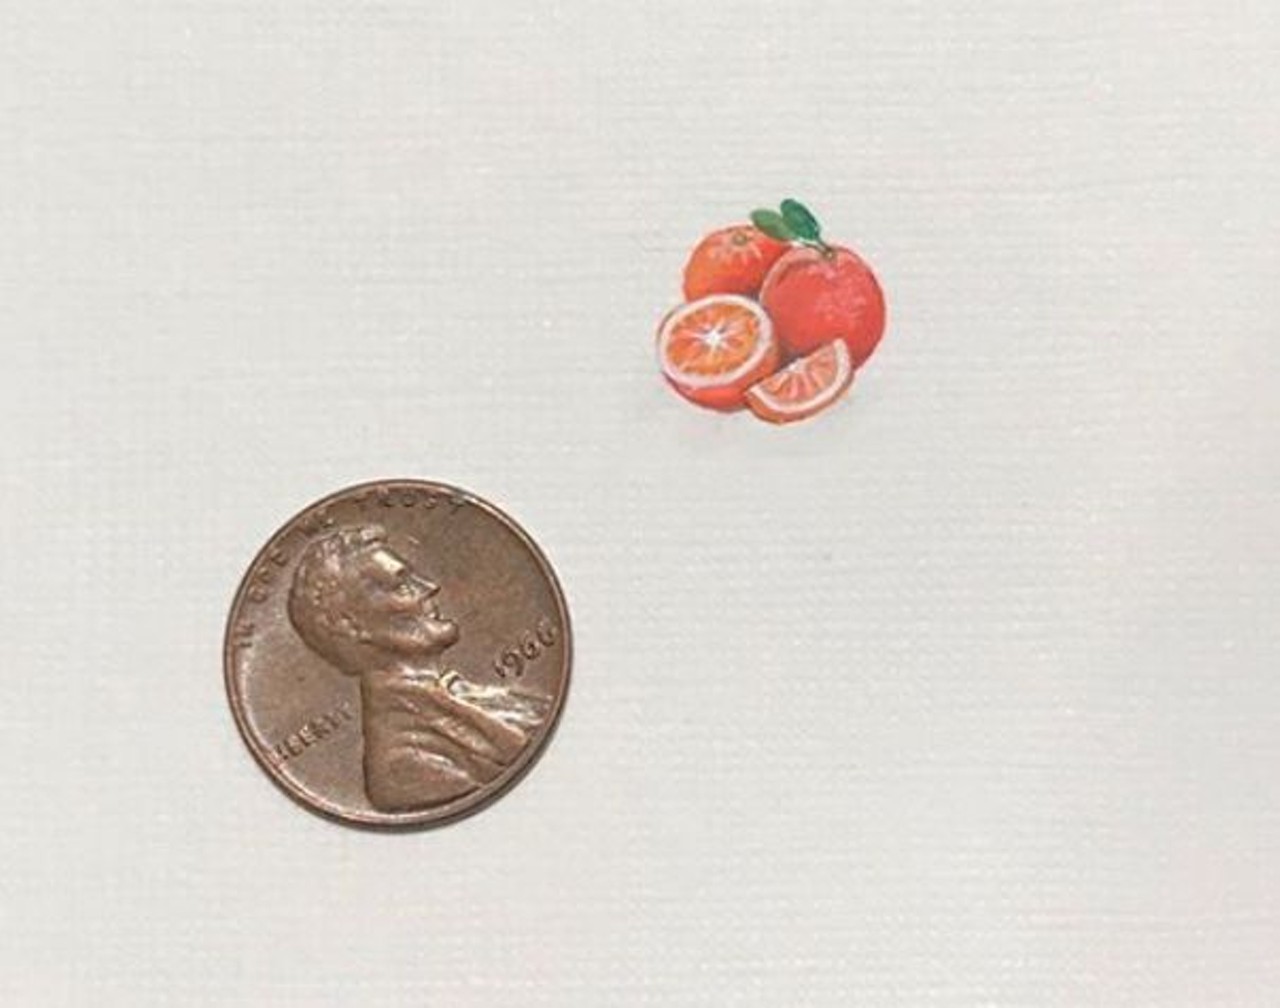 Sierra Renee Miniatures  
Good things come in small packages, and these paintings are all less than an inch big on a 4x4 inch canvas.
Photo via sierrarenee_miniature / Instagram